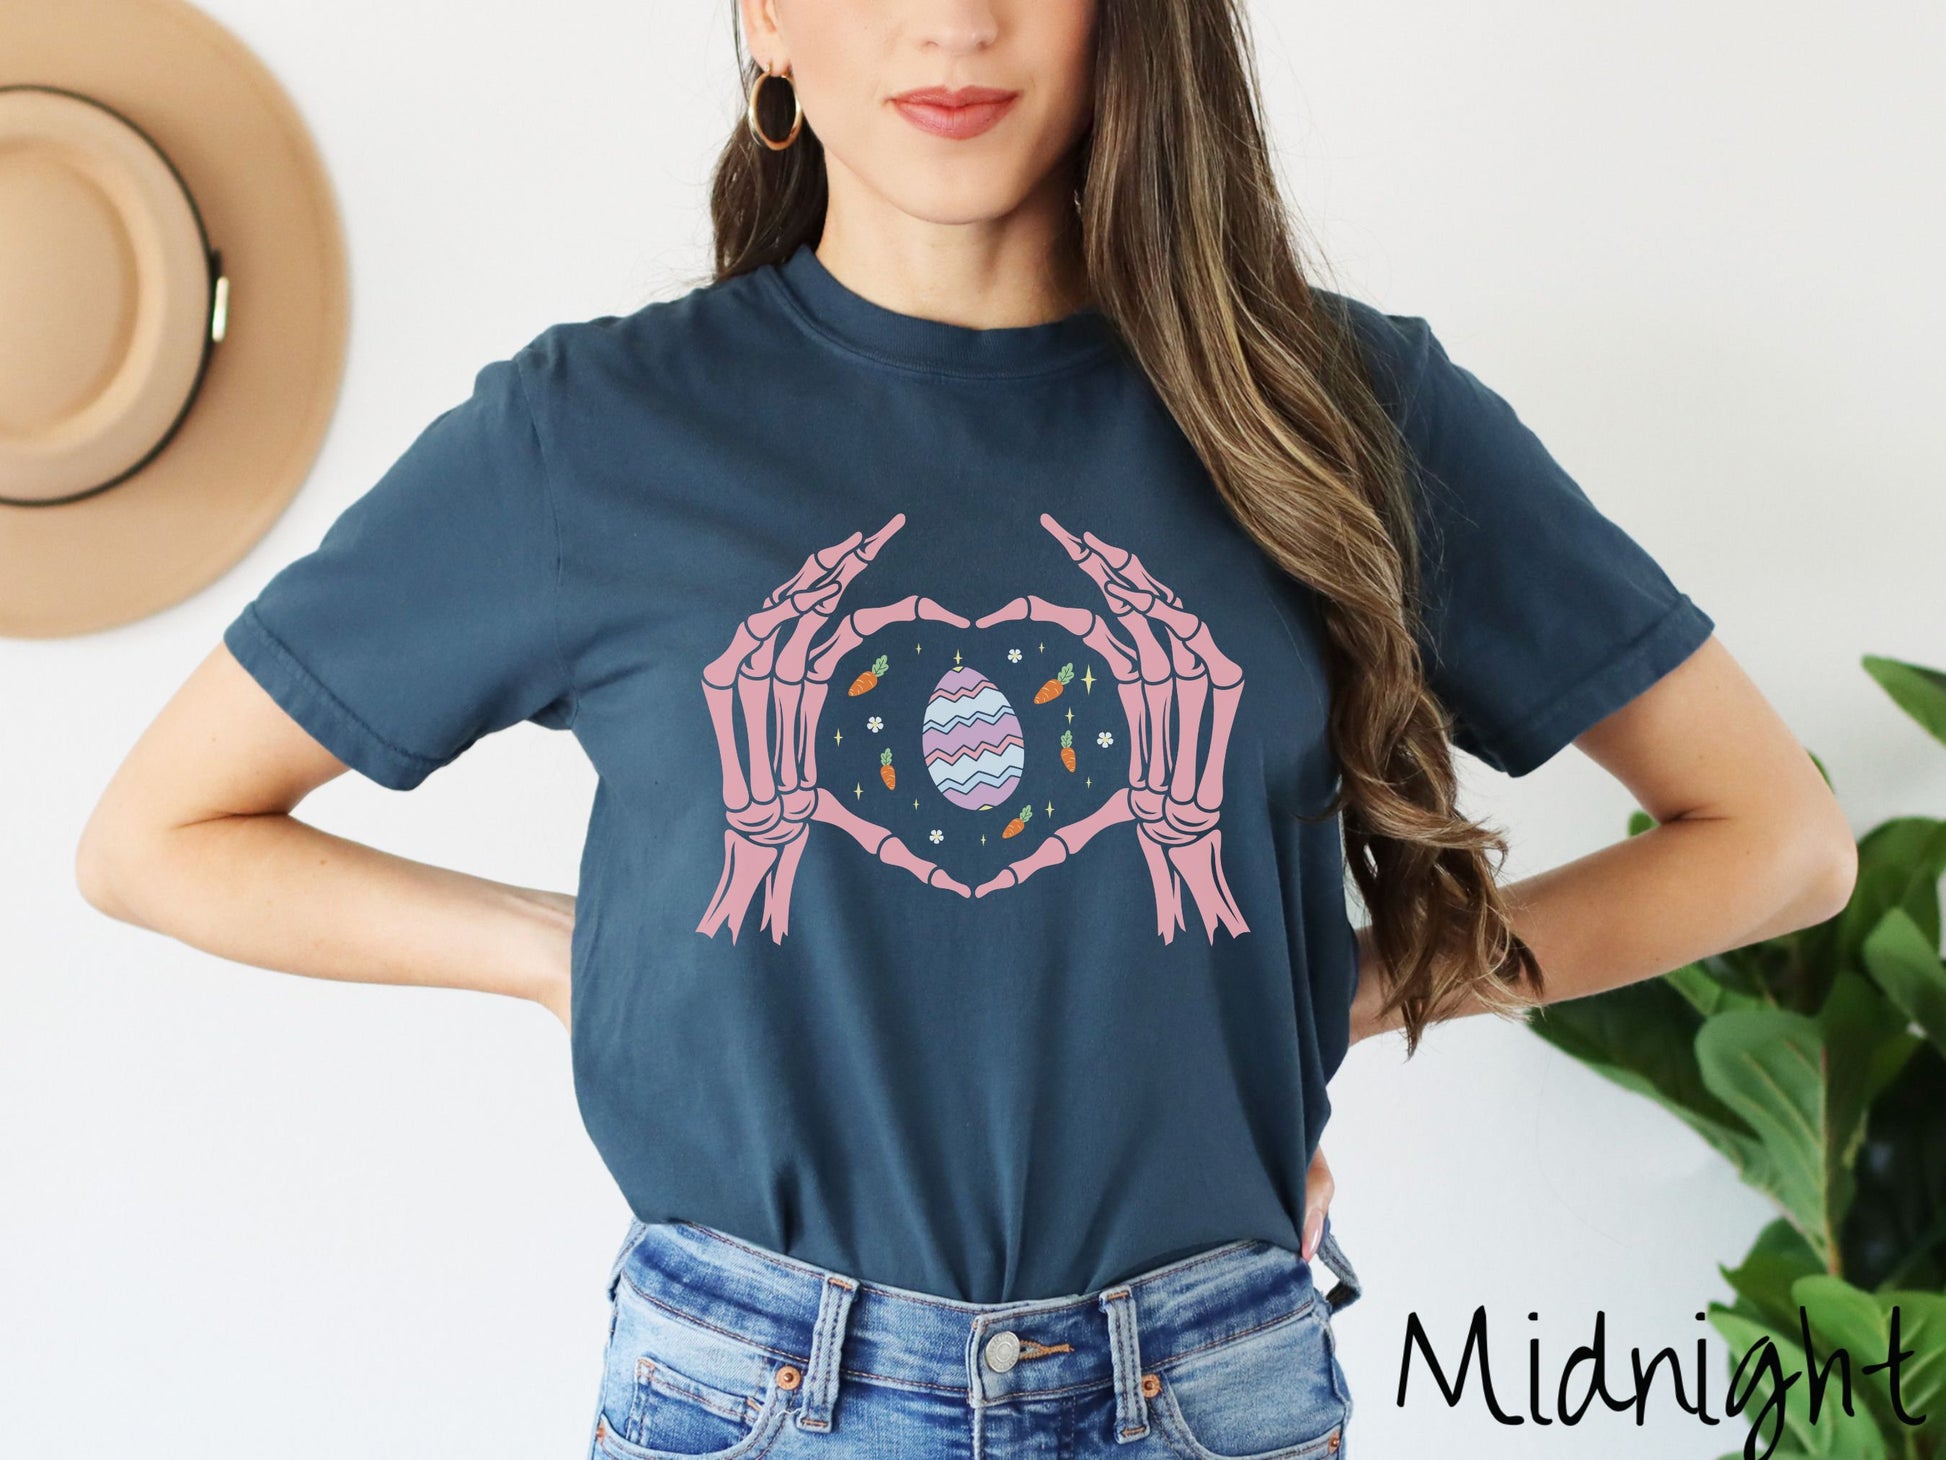 A woman wearing a cute, vintage midnight colored shirt with two skeleton hands forming a heart shape, and within the heart are an orange, purple, and blue striped Easter egg, carrots with green leaves, tiny flowers, and twinkling stars.